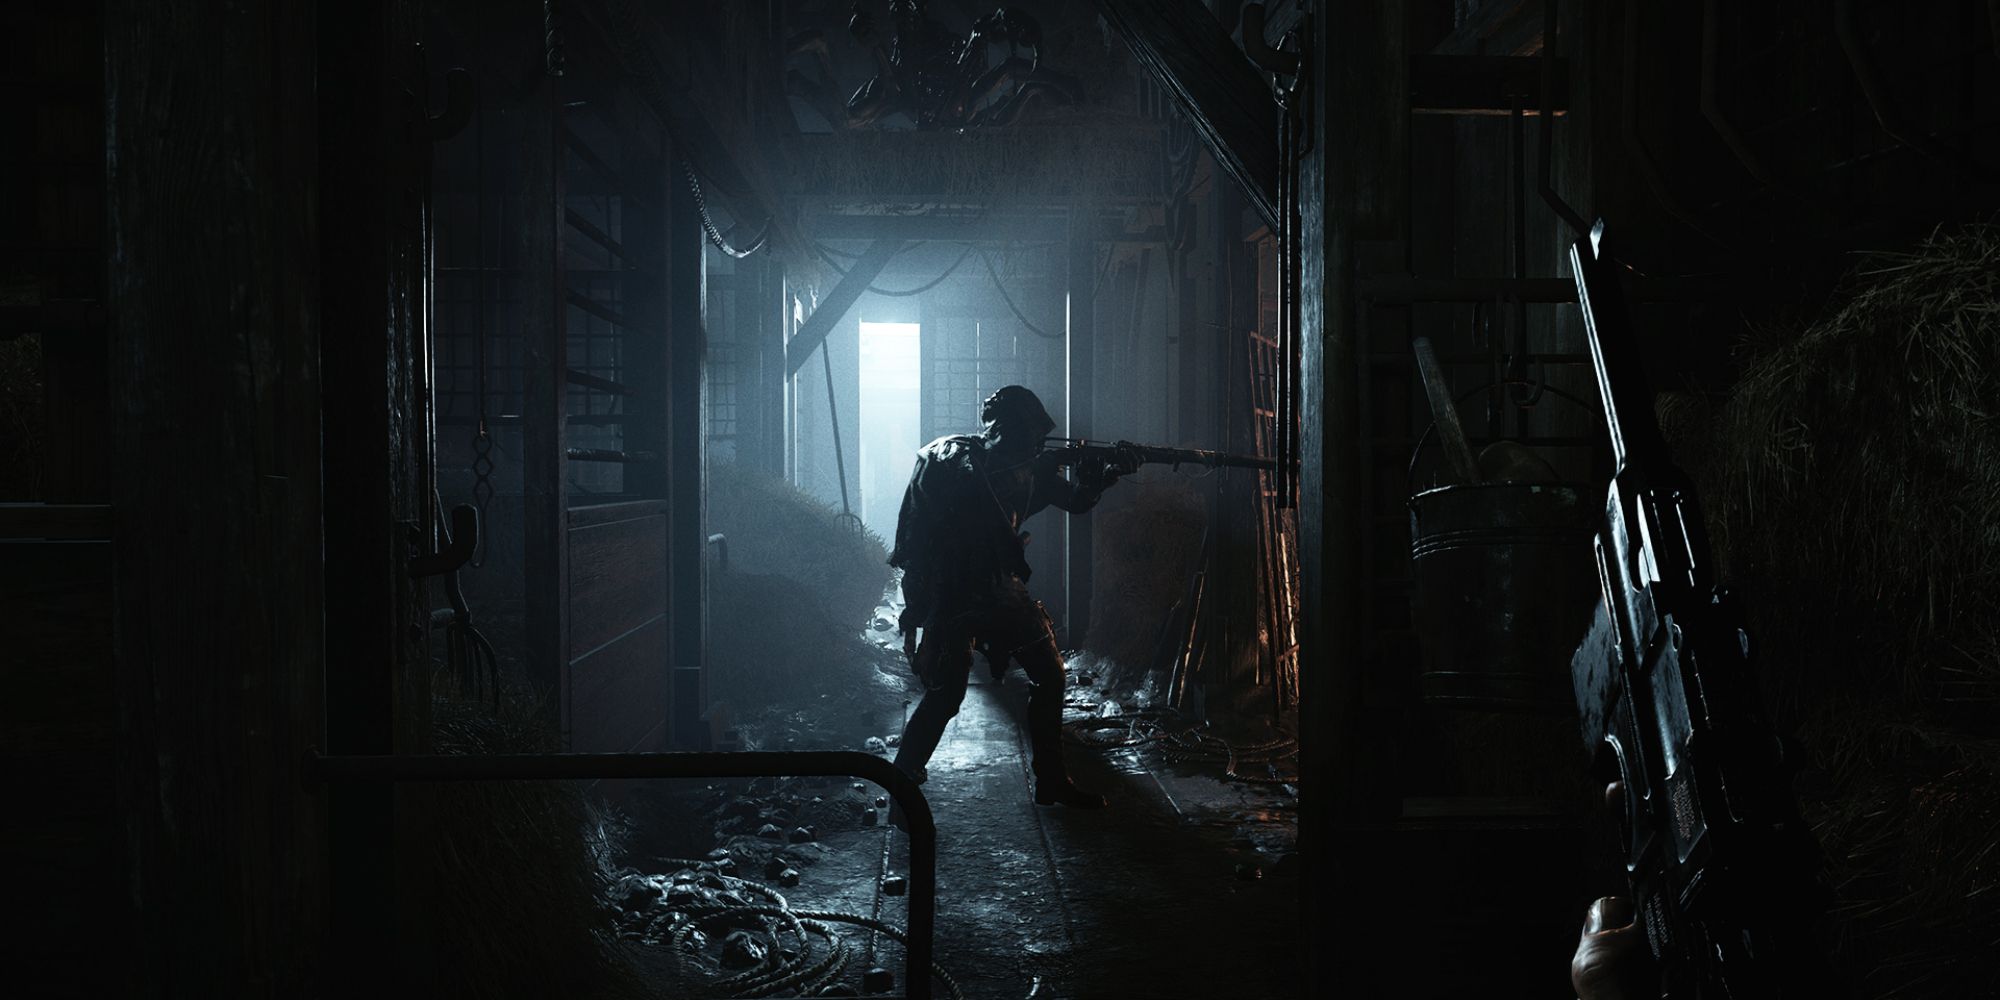 Solo Battle Royales a first-person perspective shot from Hunt: Showdown of a hand holding a pistol looking at a cloaked man in a darkened room holding a rifle